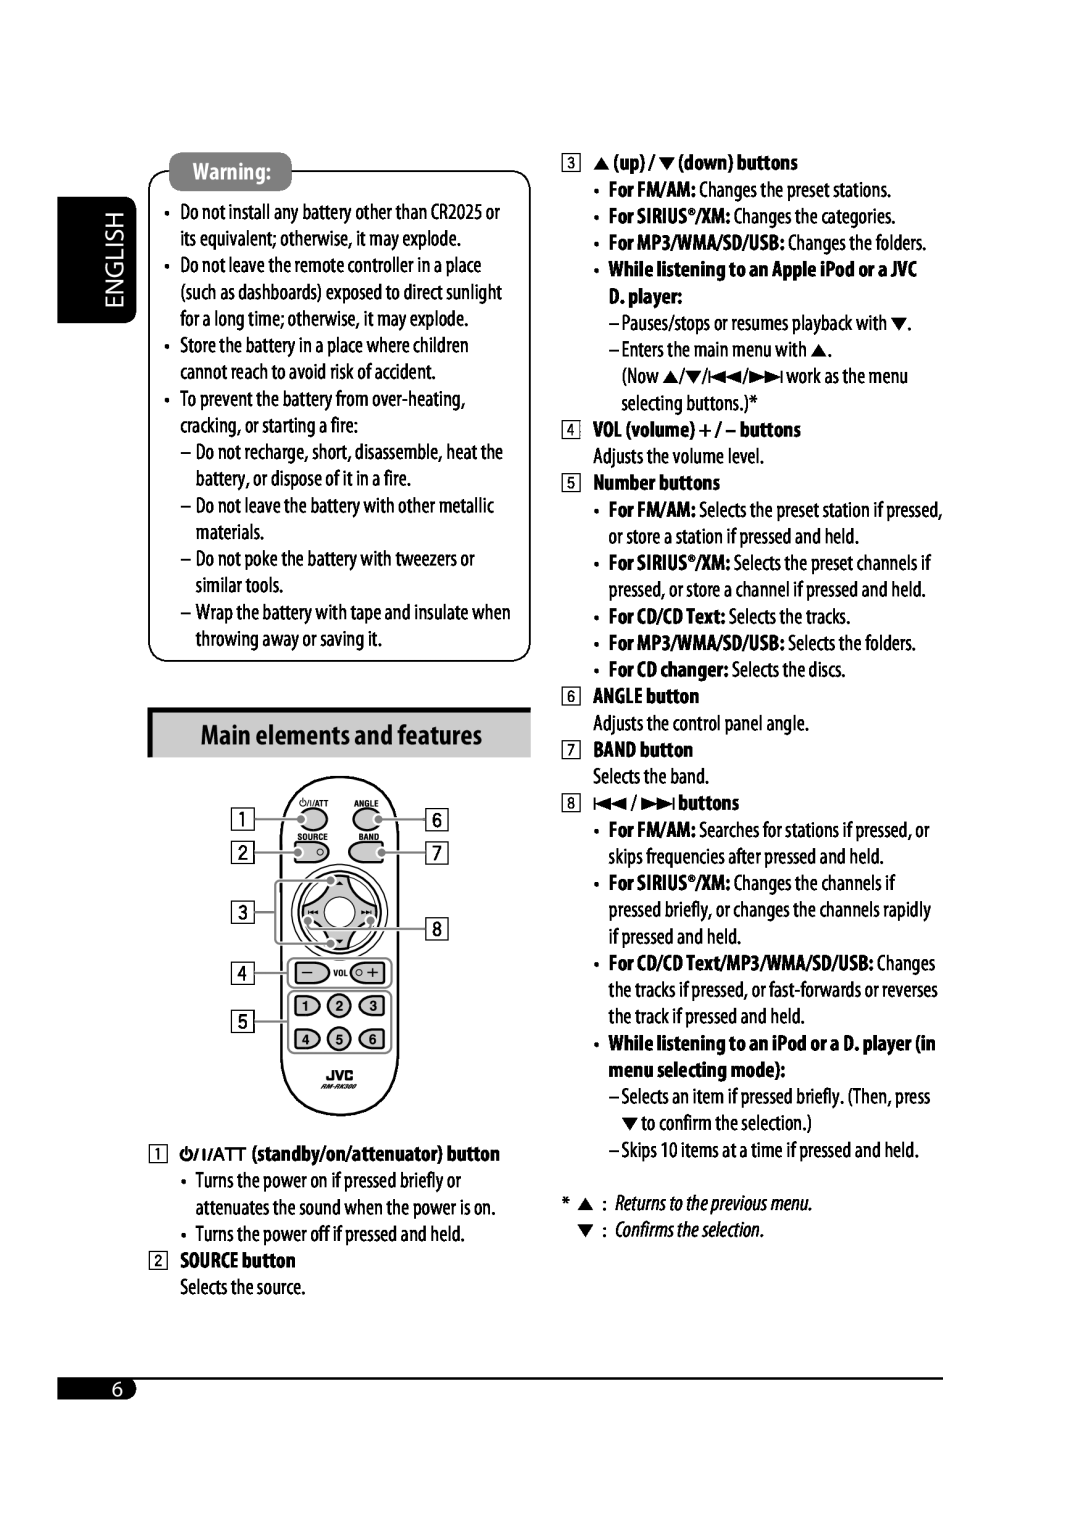 JVC KD-S100 manual Main elements and features, 35up / ∞down buttons, 5Number buttons, 6ANGLE button, 84/ ¢buttons 